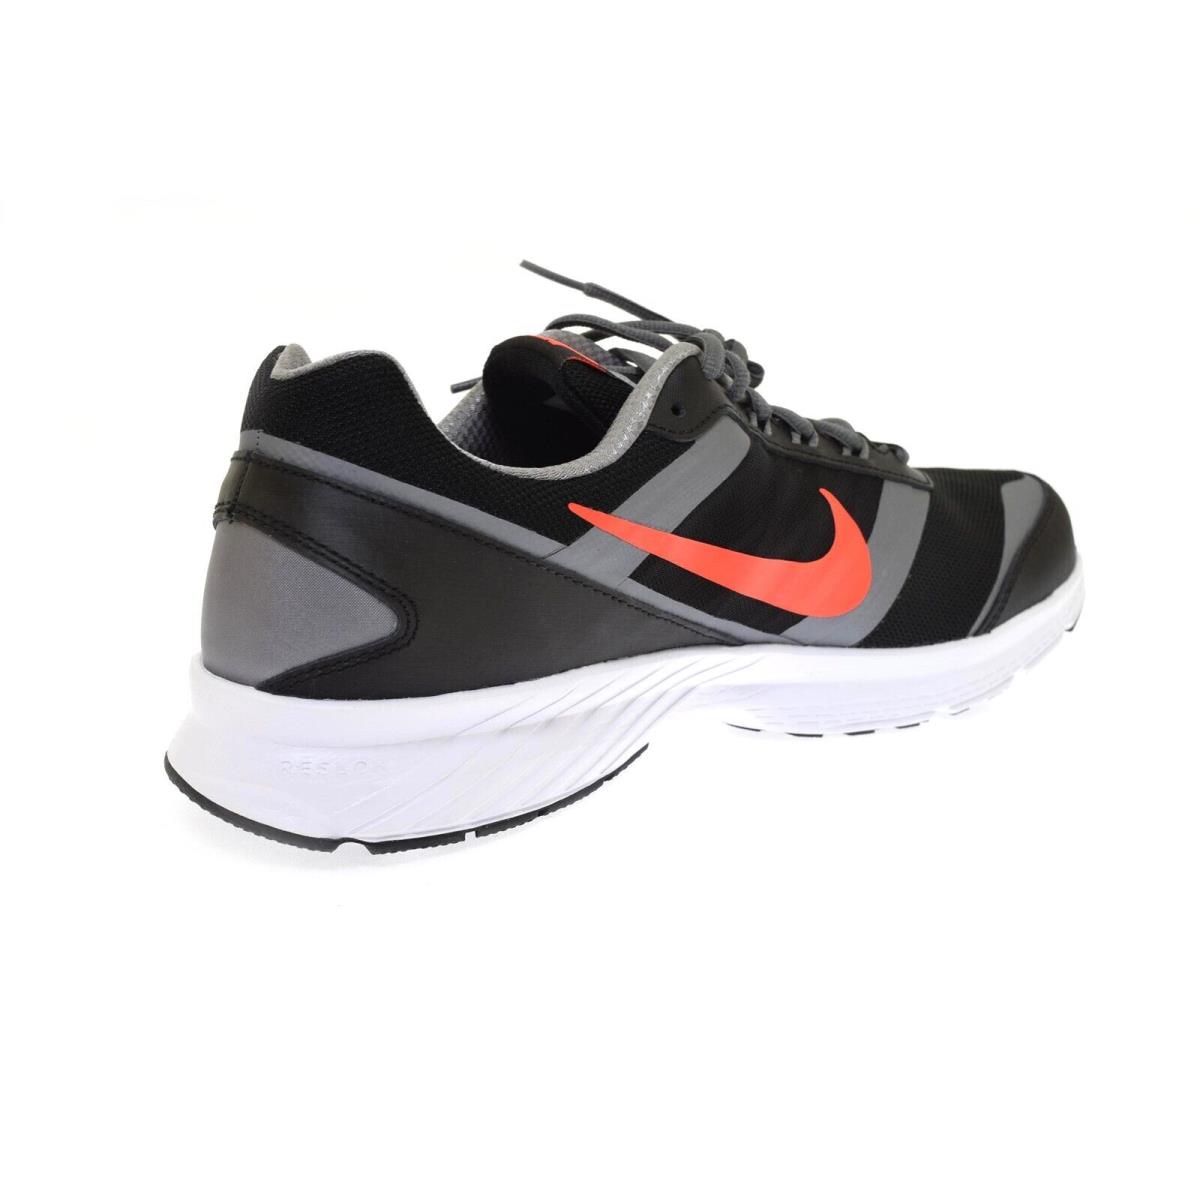 Nike shoes  - BLK/GRY/ORNG 1